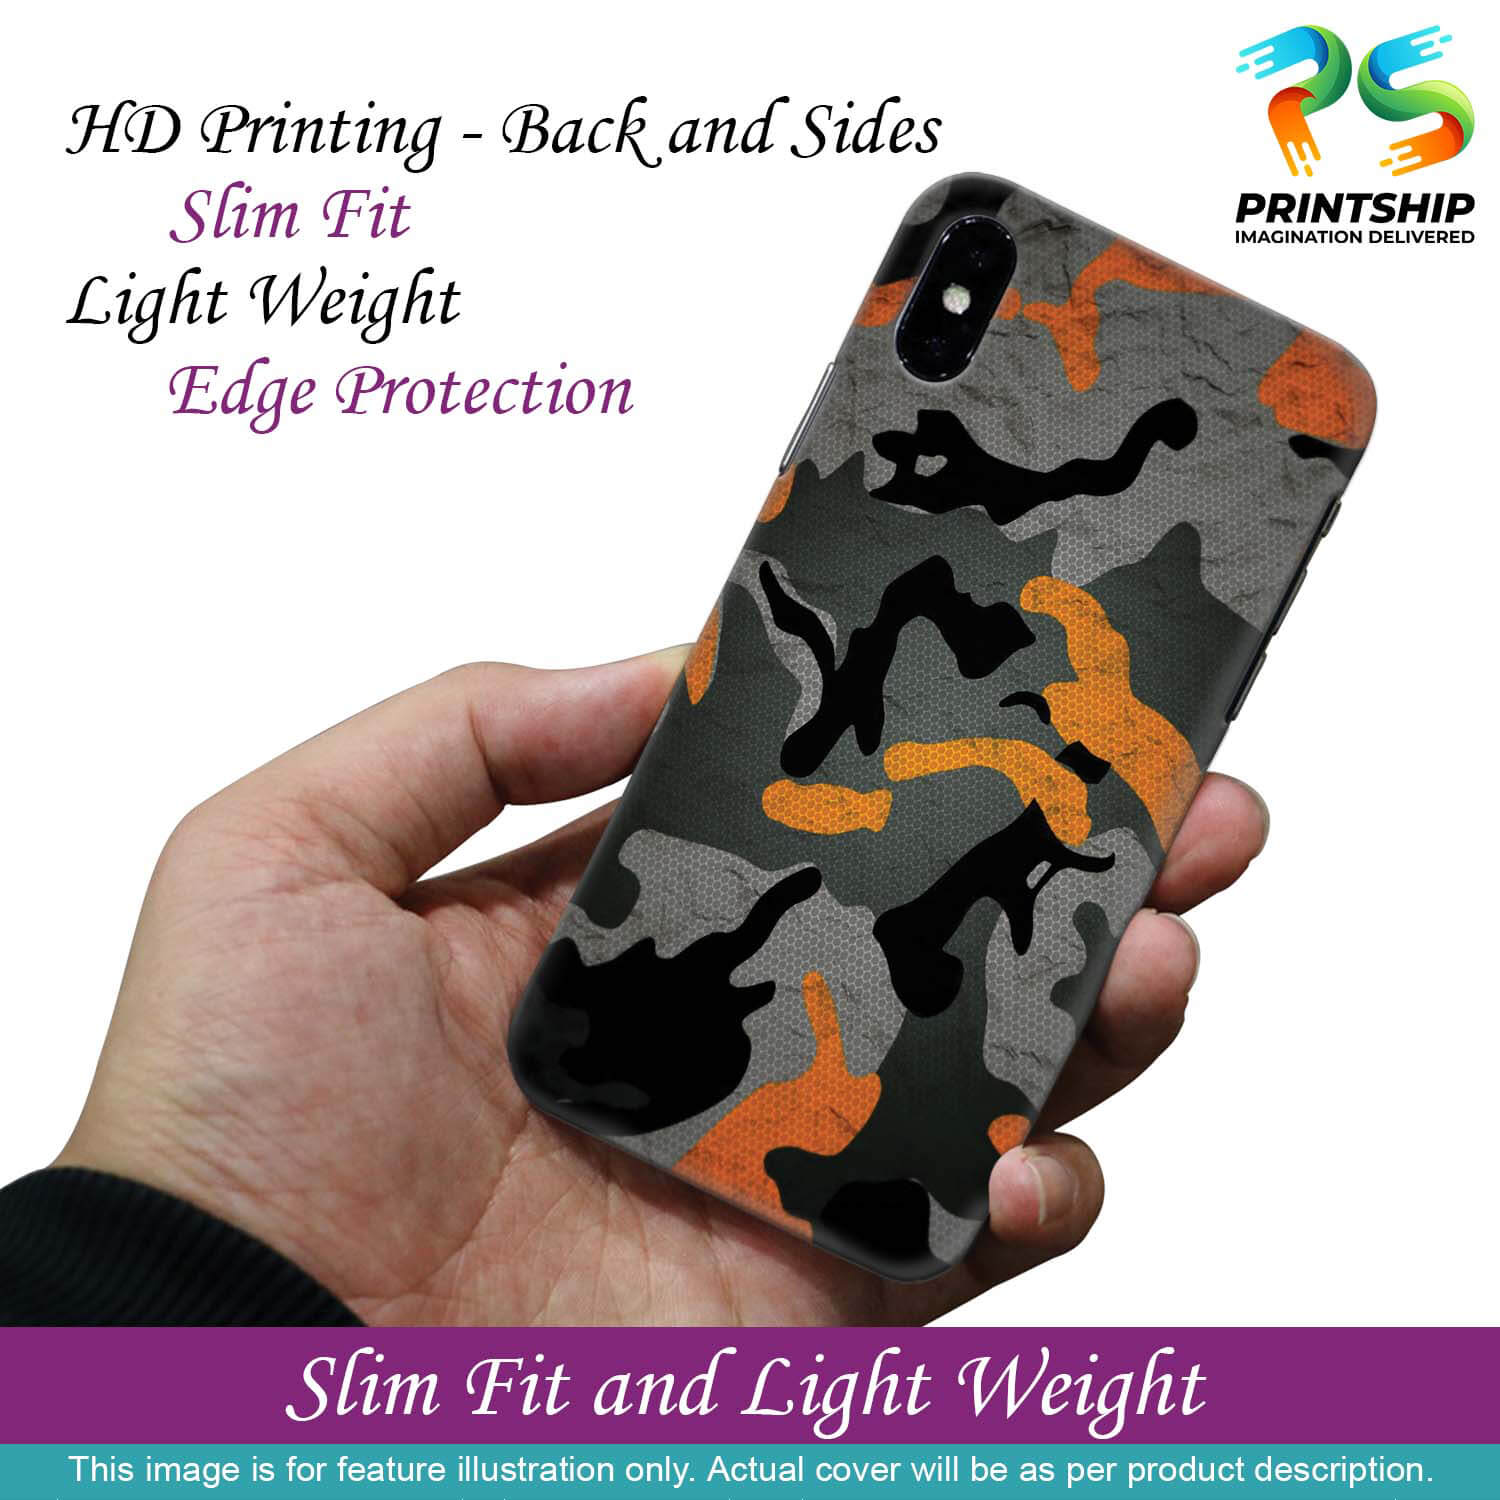 PS1337-Premium Looking Camouflage Back Cover for Samsung Galaxy A2 Core